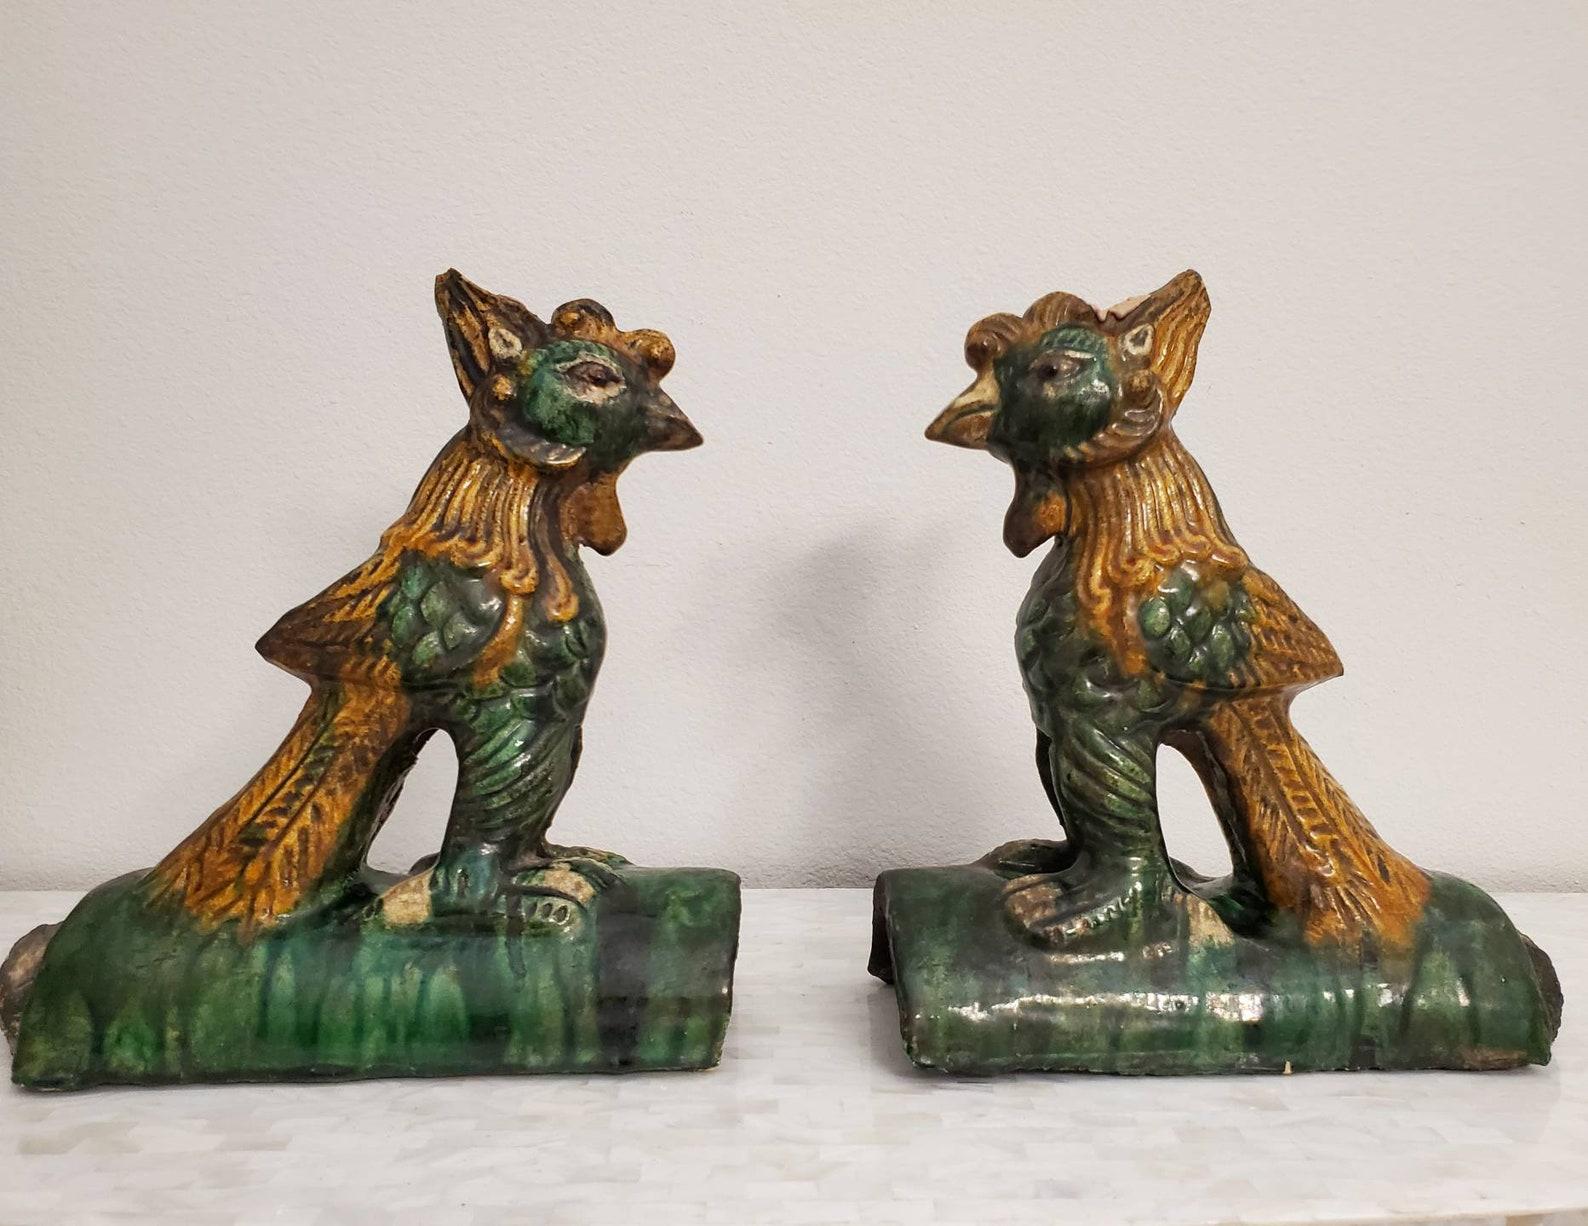 A finely rendered pair of Chinese Qing Dynasty (1644-1910) ceramic architectural roof tiles, glazed in the rich Sancai palette, skillfully modelled as a mythical Phoenix perched atop semi-circular roof tile, the whimsical creature reminiscent of an